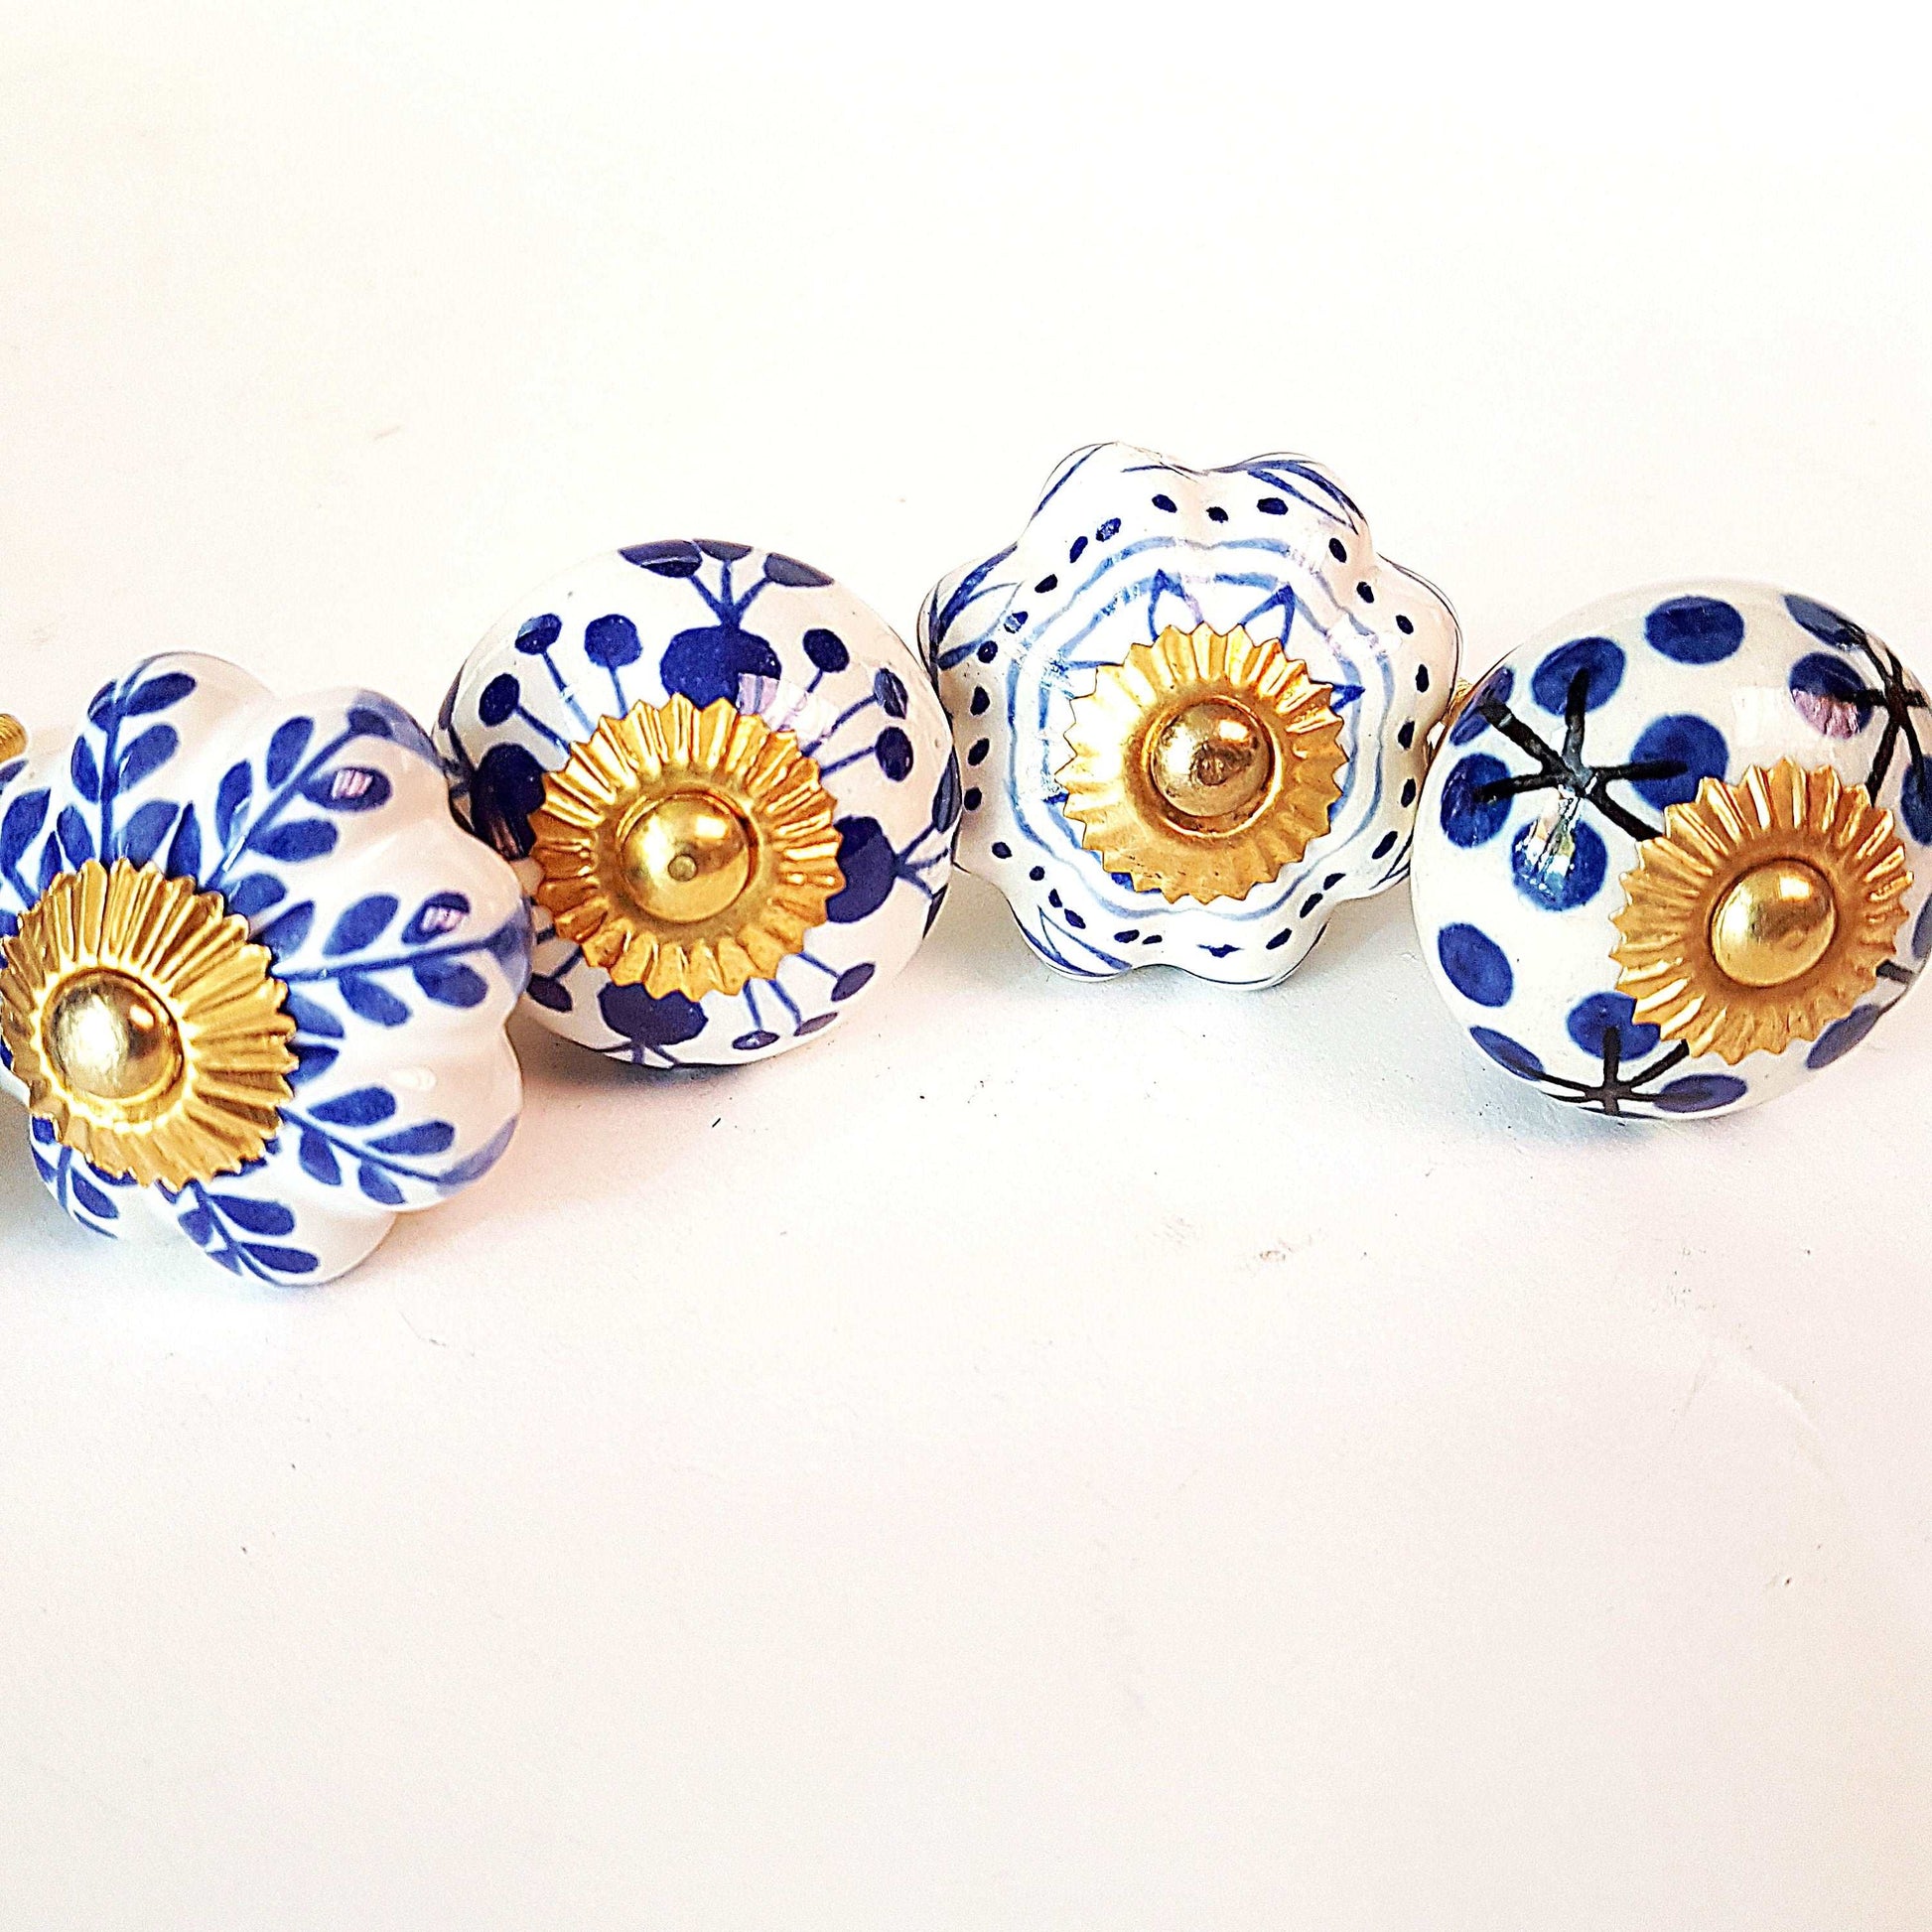 8 Delft blue cupboard knobs, ceramic hand painted, for cabinets, furniture and home decorating. Antique vintage drawer pulls. 1.5 inches. - Vintage India Ca